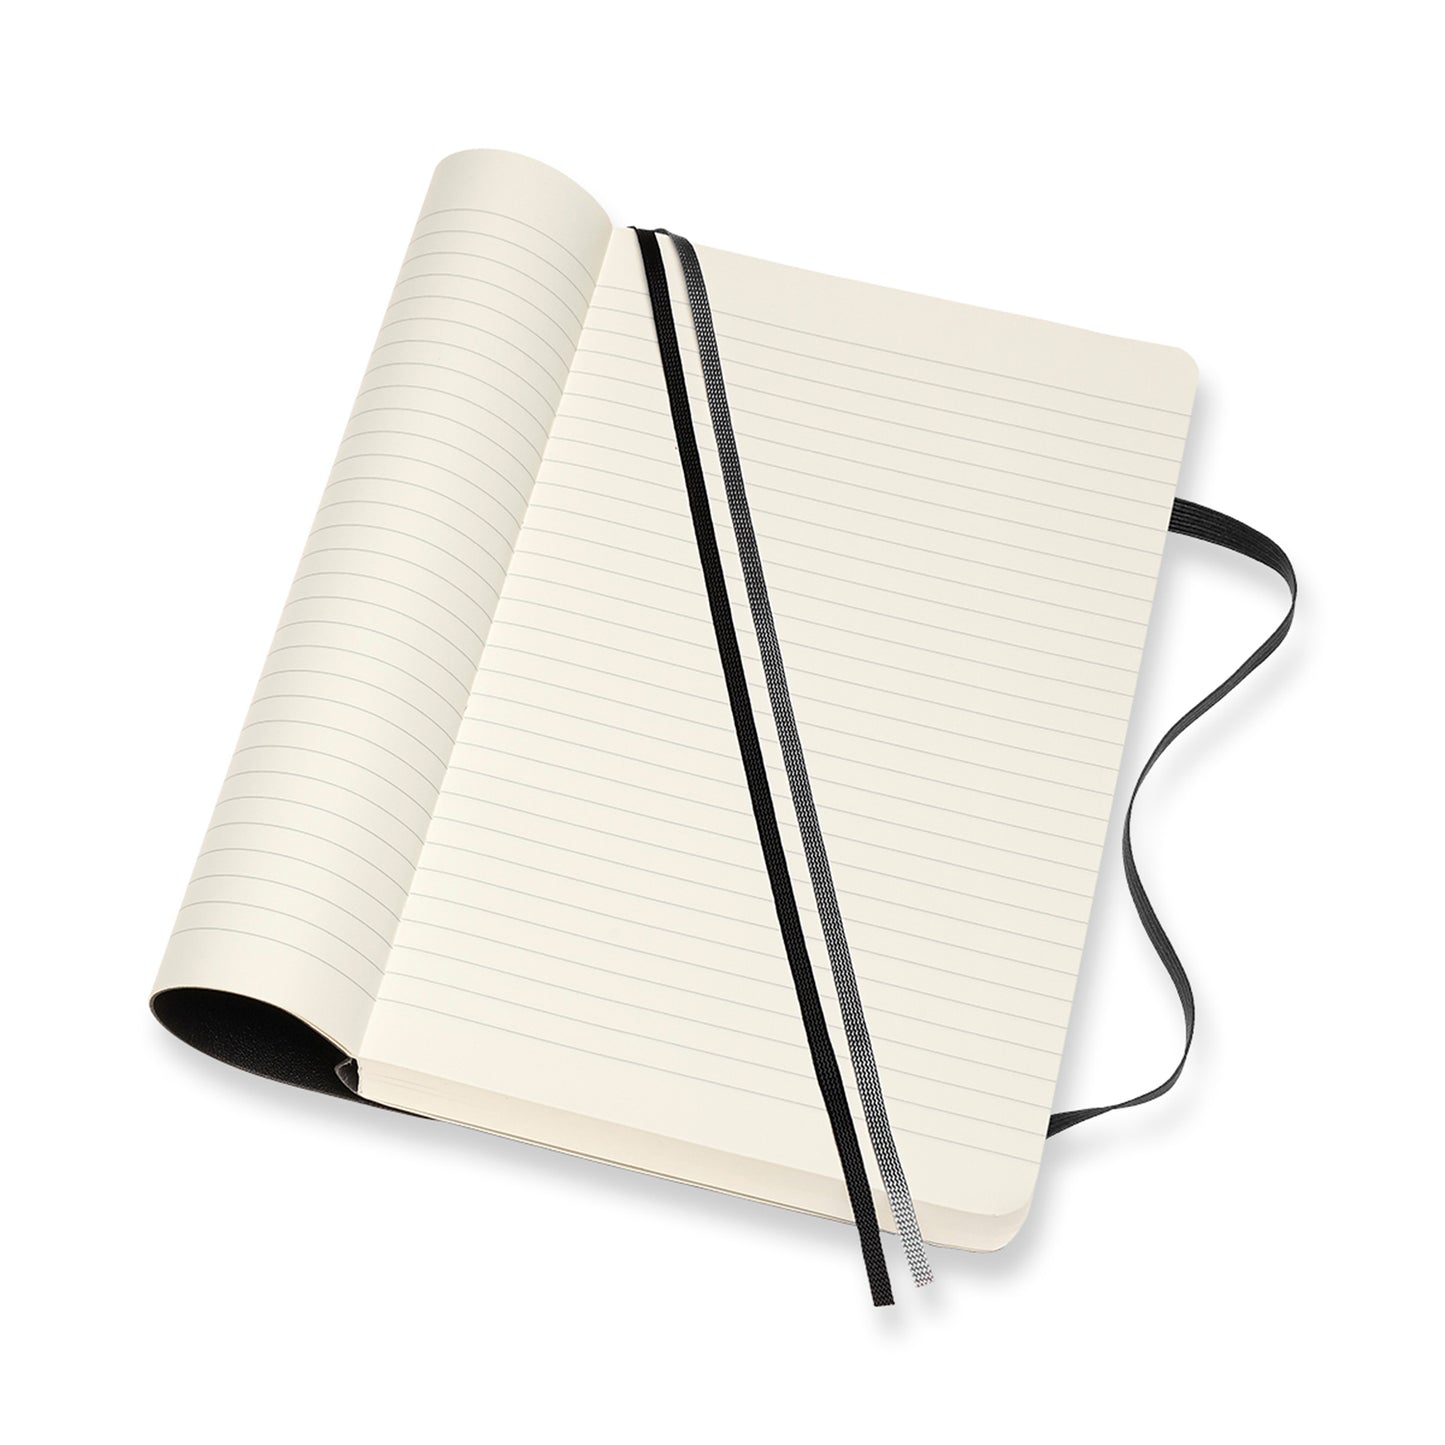 Beige Classic Notebook - Expanded Version - Black Softcover / Dotted / Large,Softcover / Plain / Large,Softcover / Ruled / Large,Softcover / Squared / Large,Hardcover / Dotted / Large,Hardcover / Plain / Large,Hardcover / Ruled / Large,Hardcover / Squared / Large Moleskine